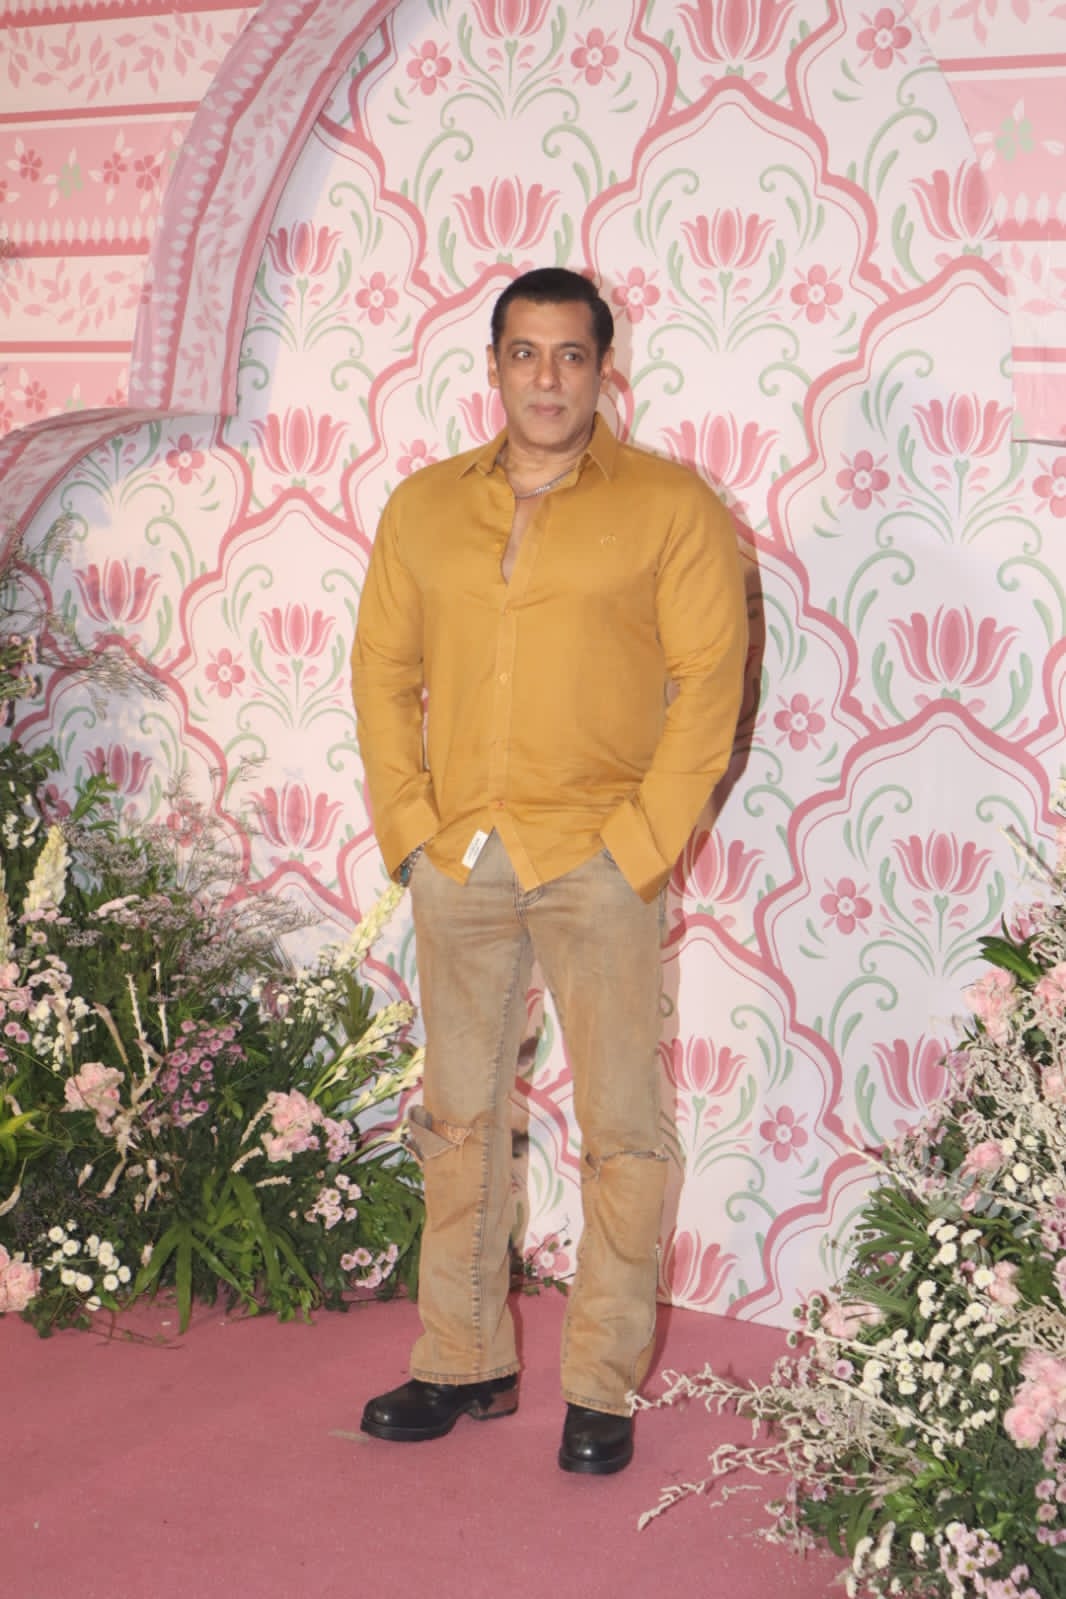 Salman Khan attended the event last night